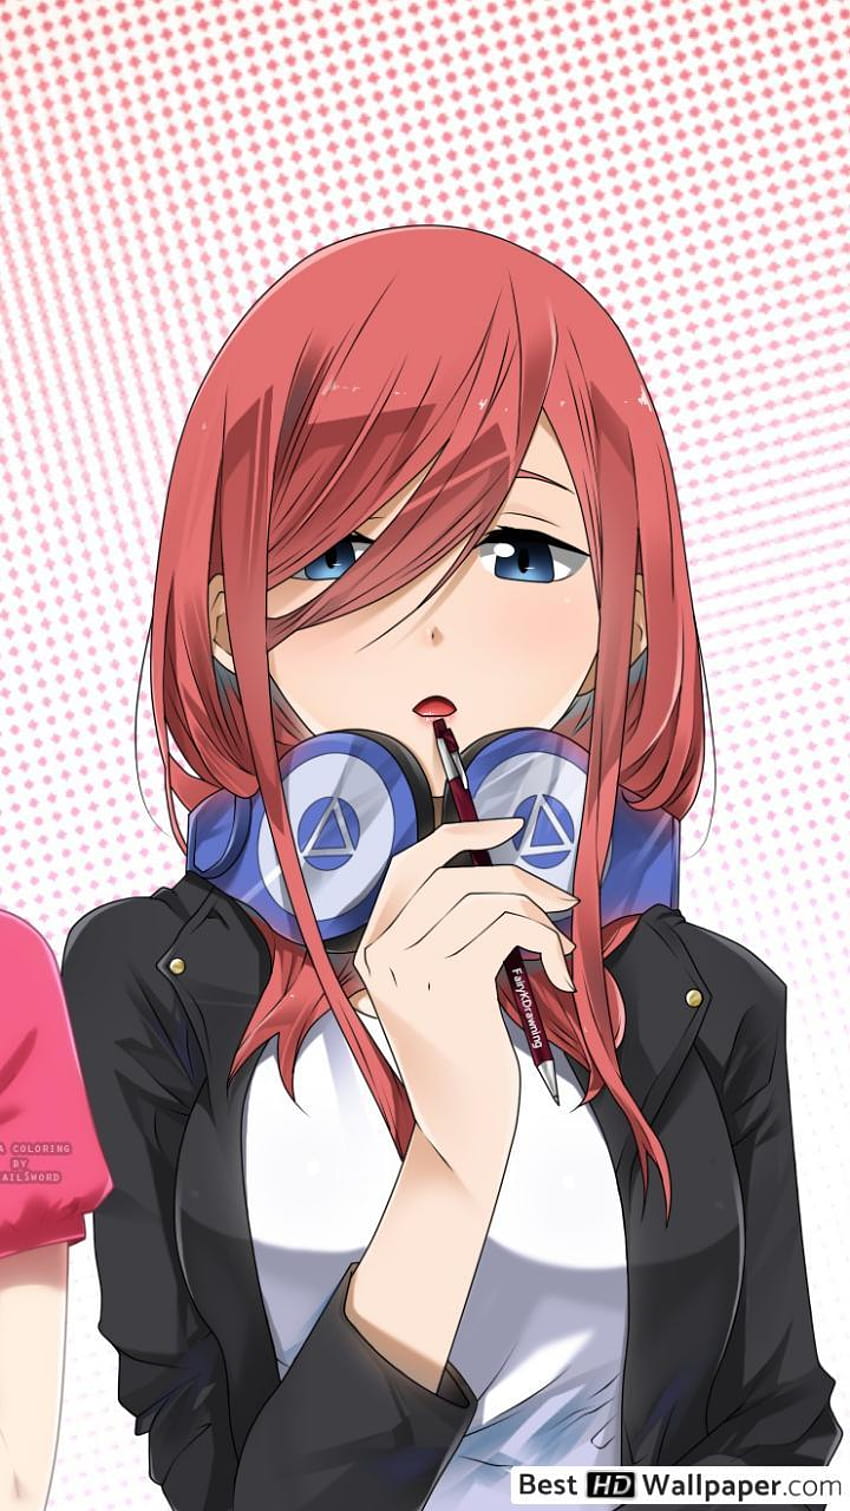 The Quintessential Quintuplets Anime Tshirts Hoodies Sweatshirts and more